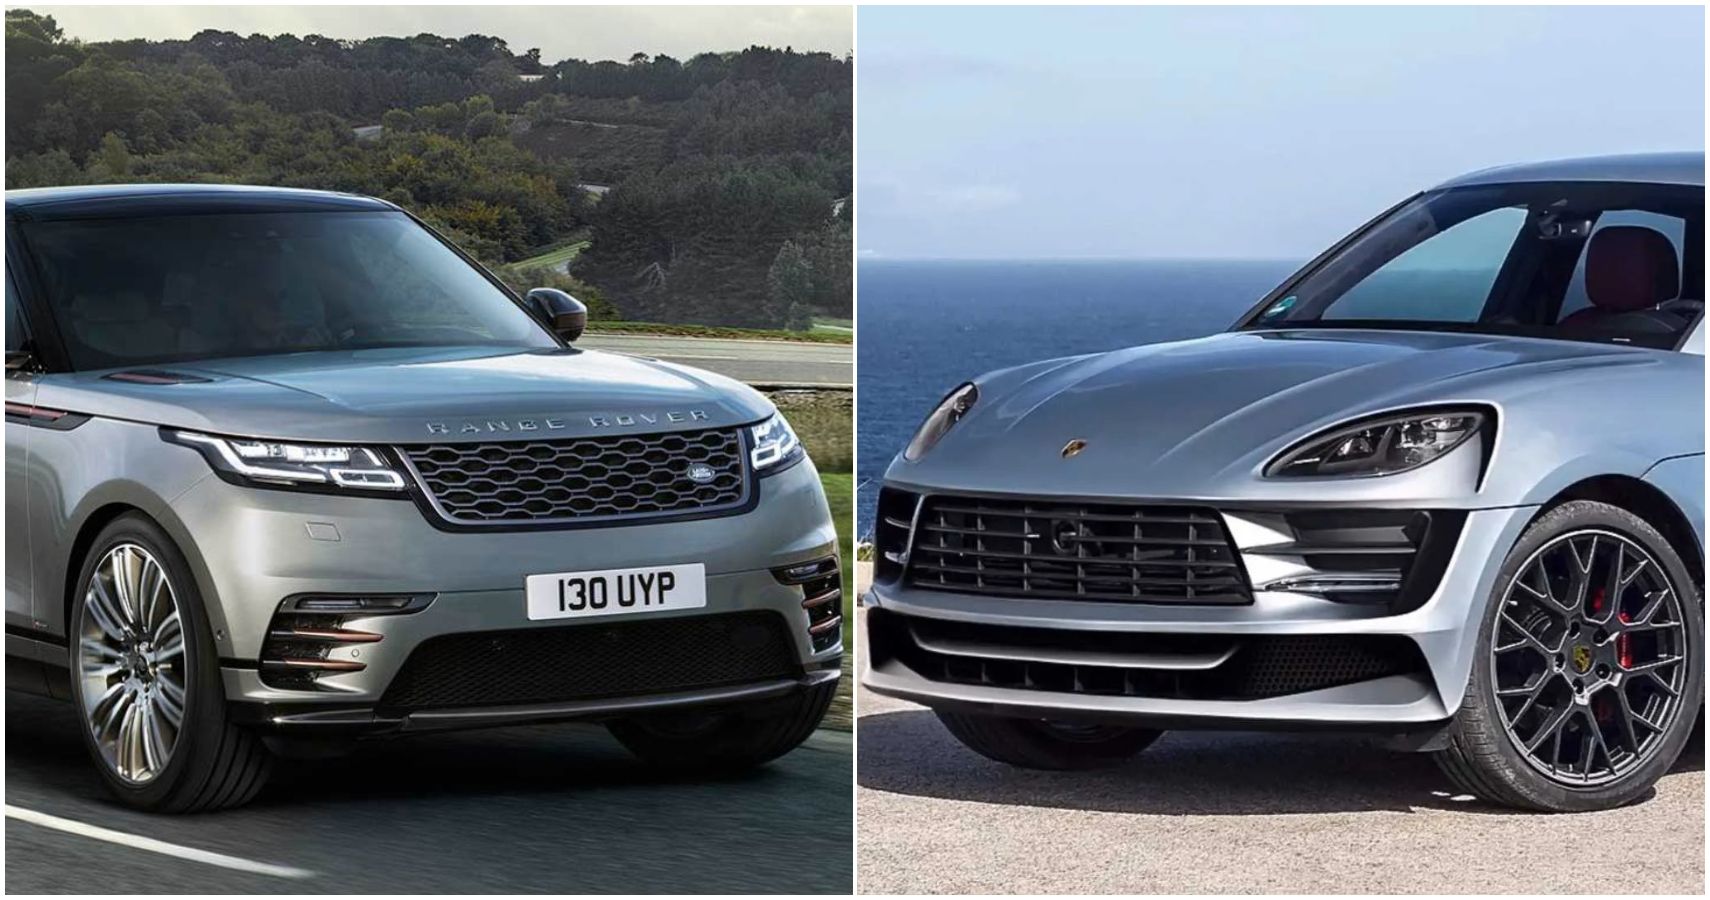 An Image Of A Range Rover Velar And A Porsche Macan Side By Side